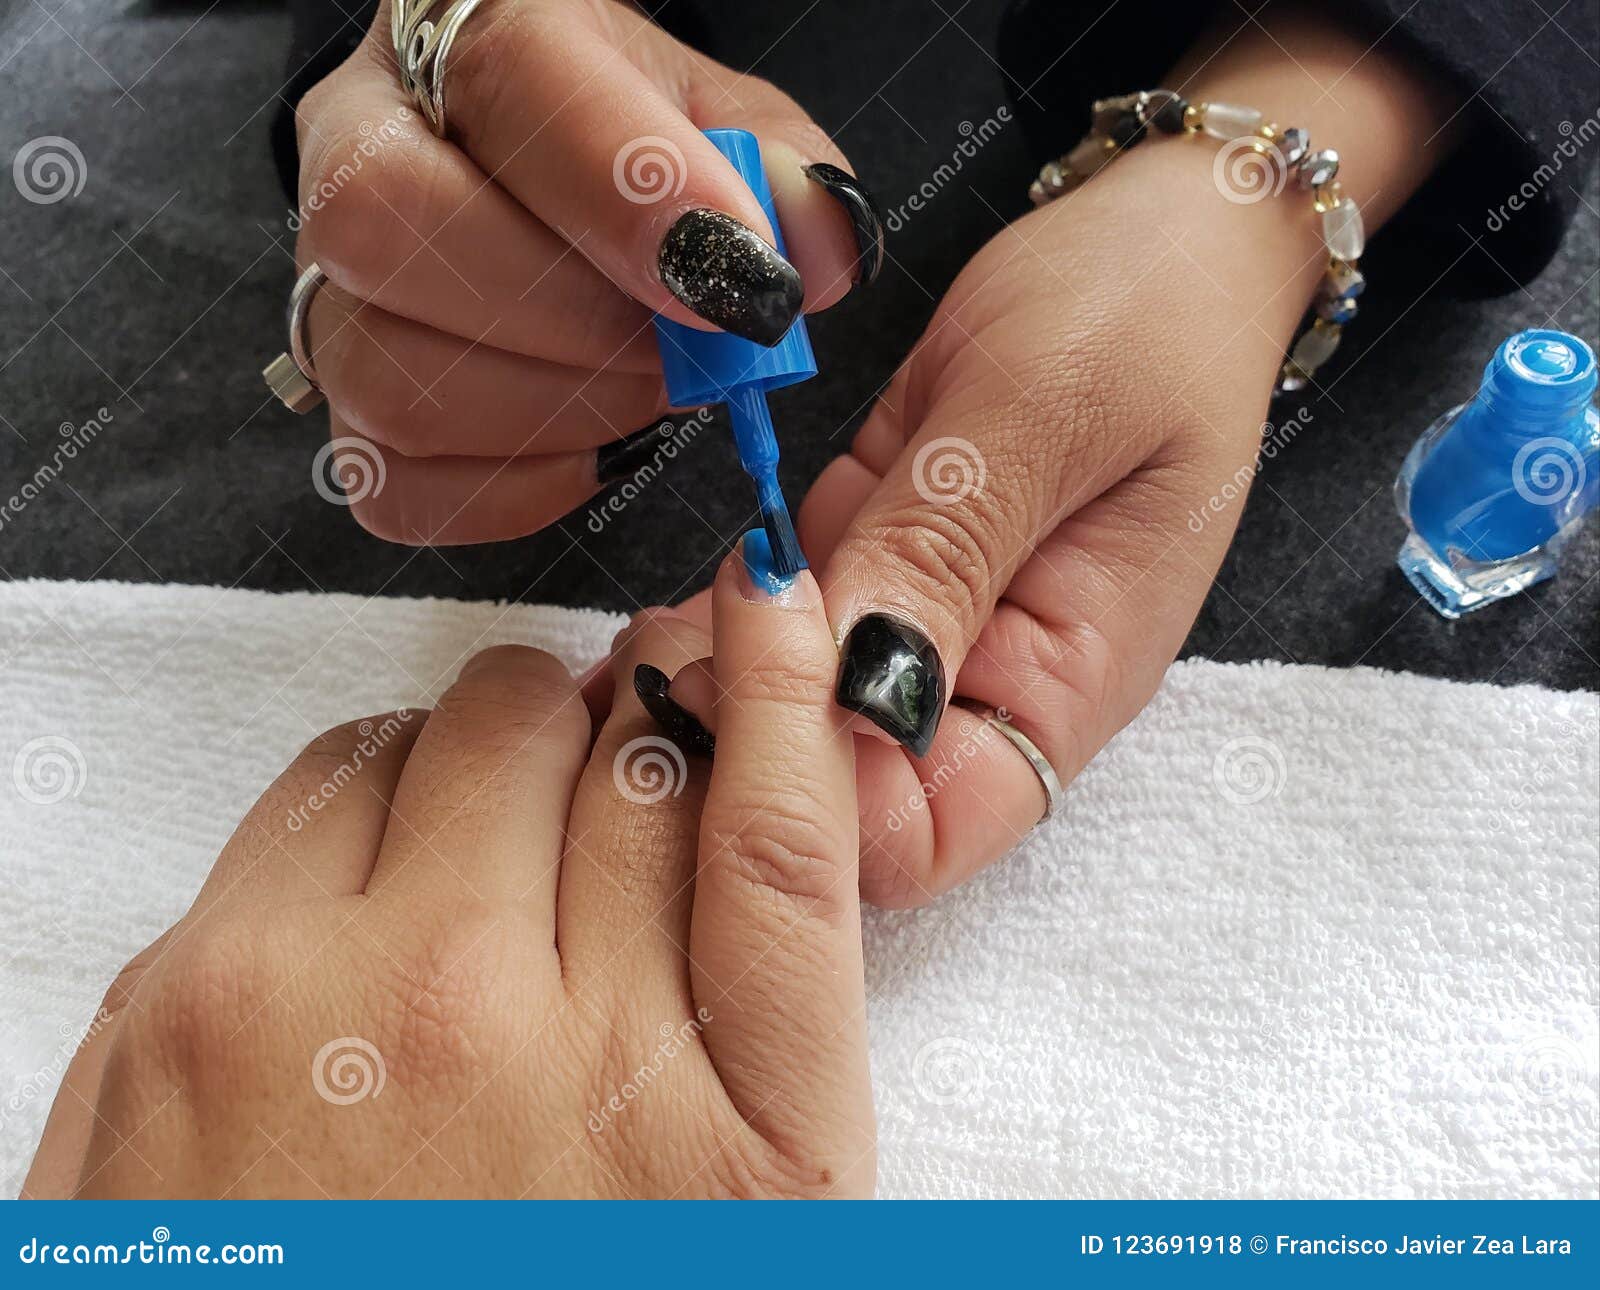 woman painting the fingernails of another woman with blue nail polish